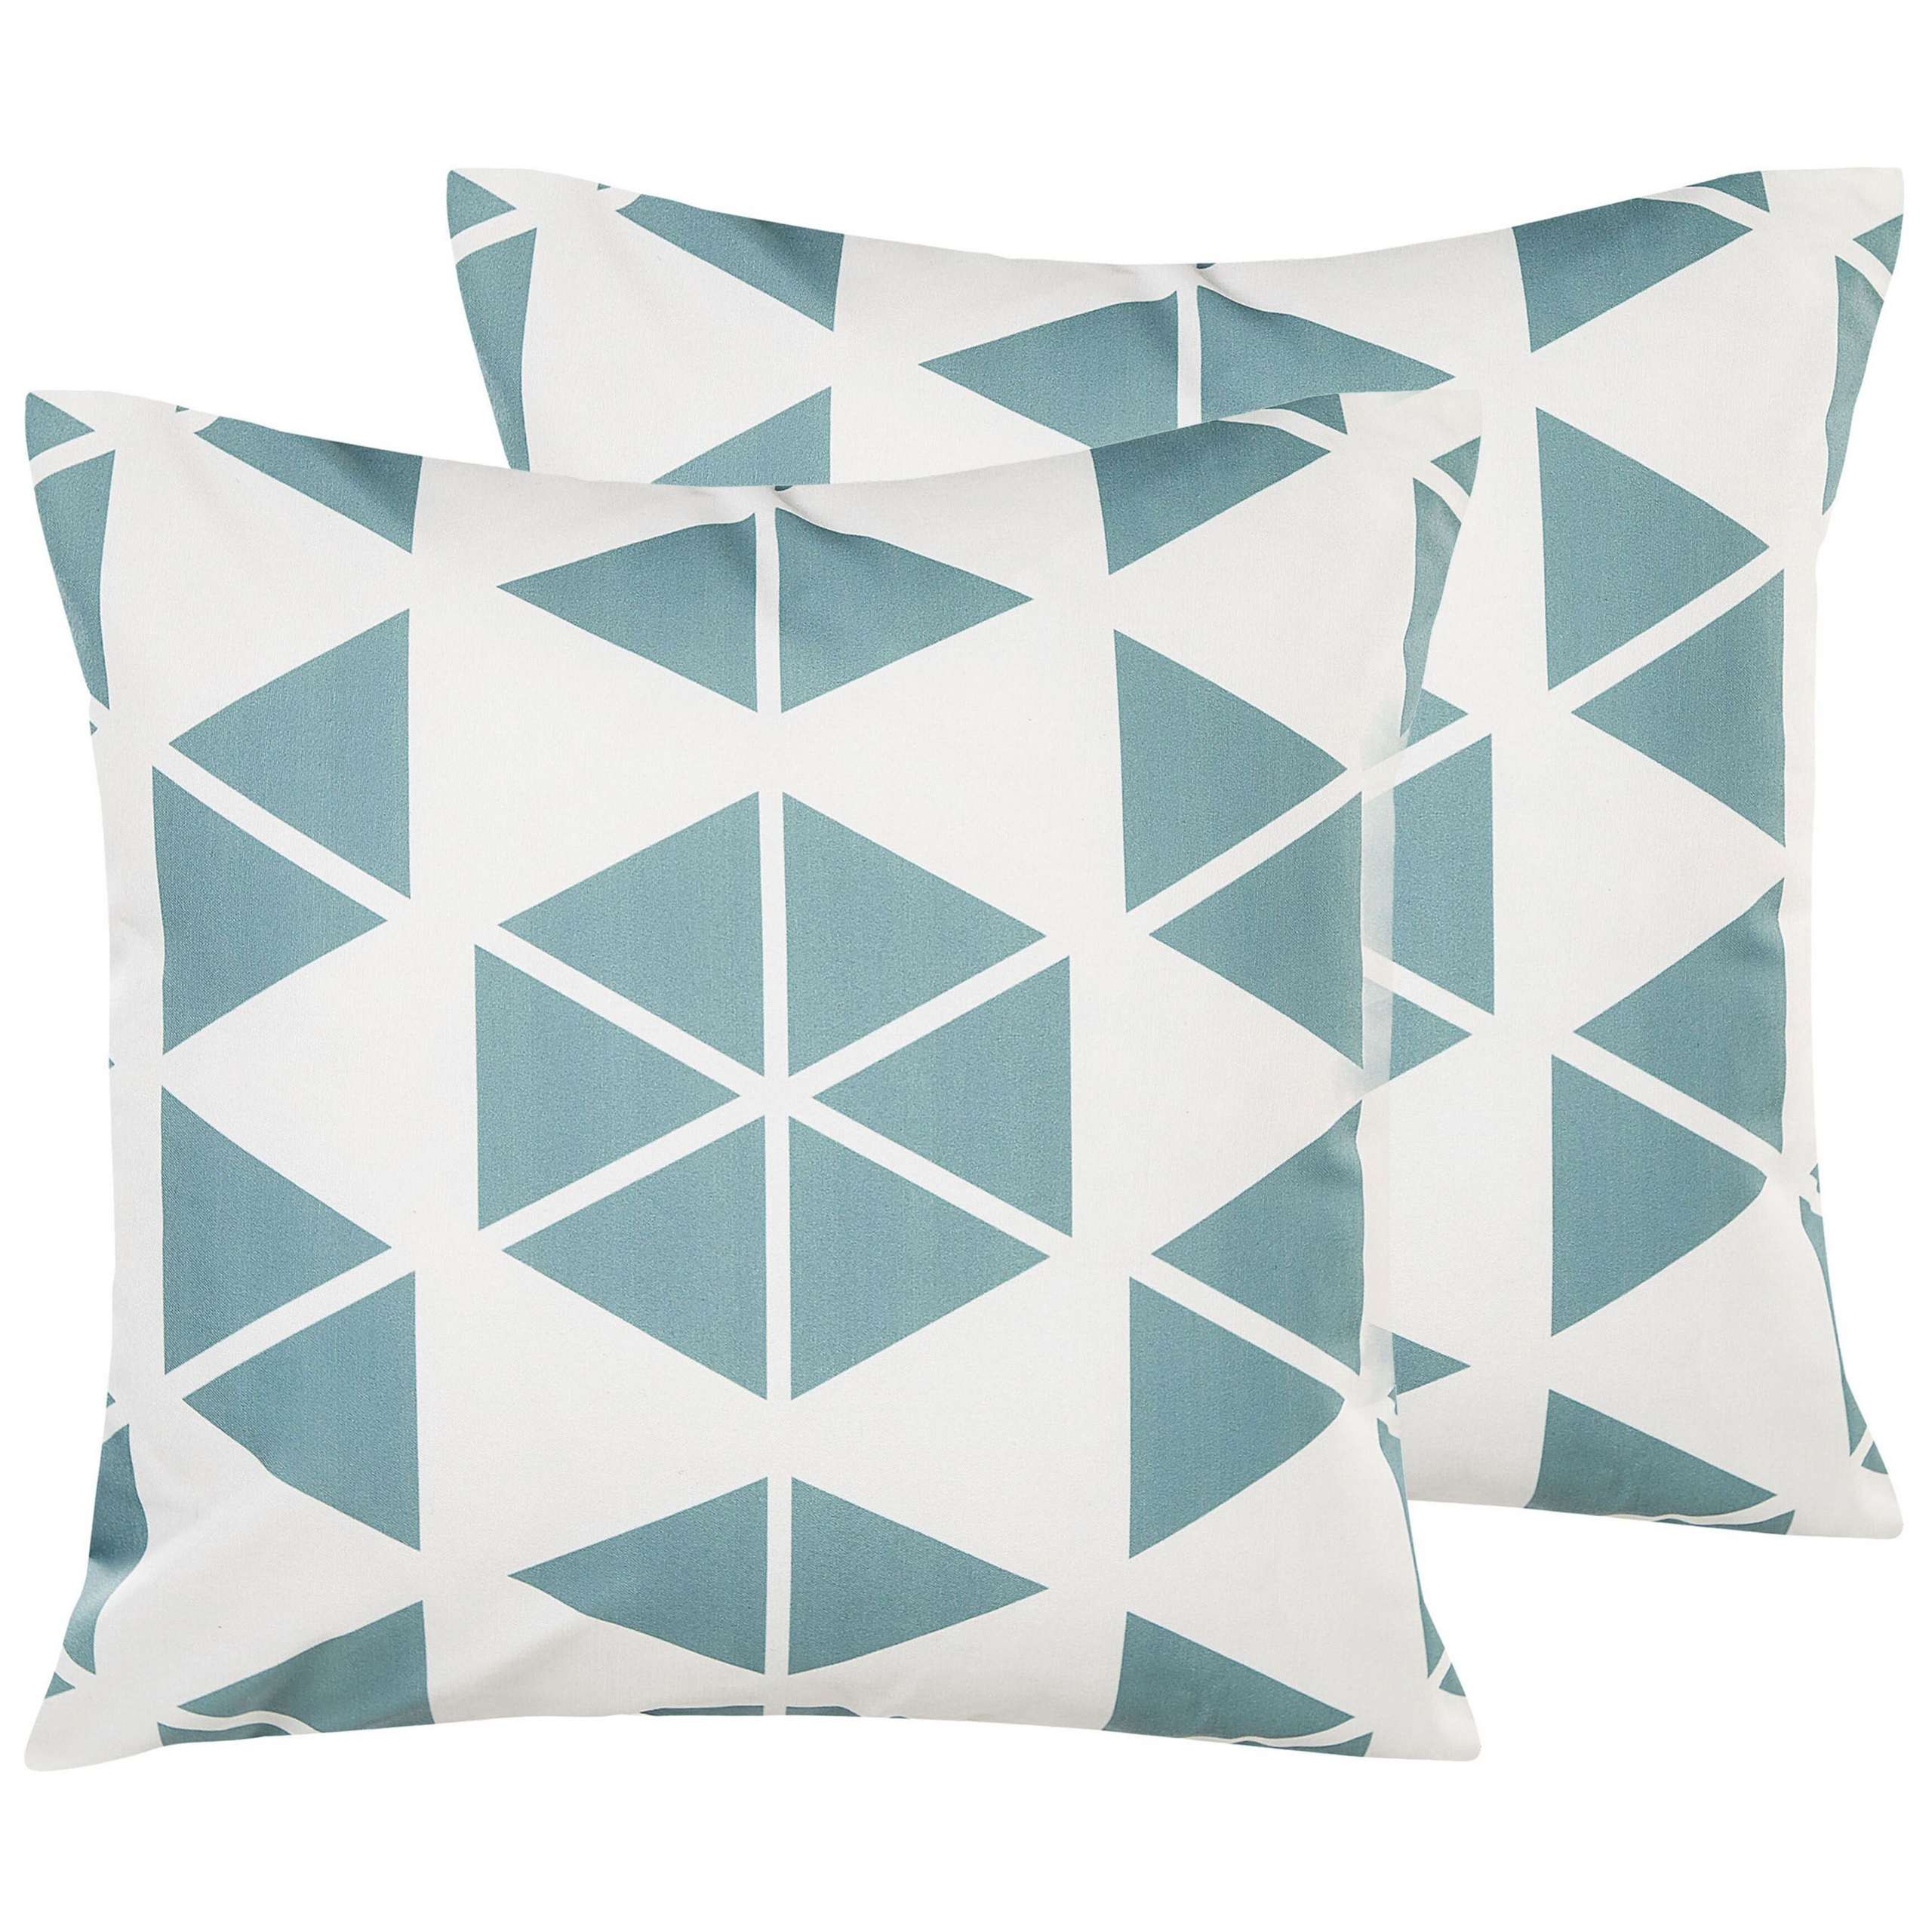 Beliani Set of 2 Outdoor Garden Pillows White and Blue Polyester Square 45 x 45 cm Triangle Geometric Pattern